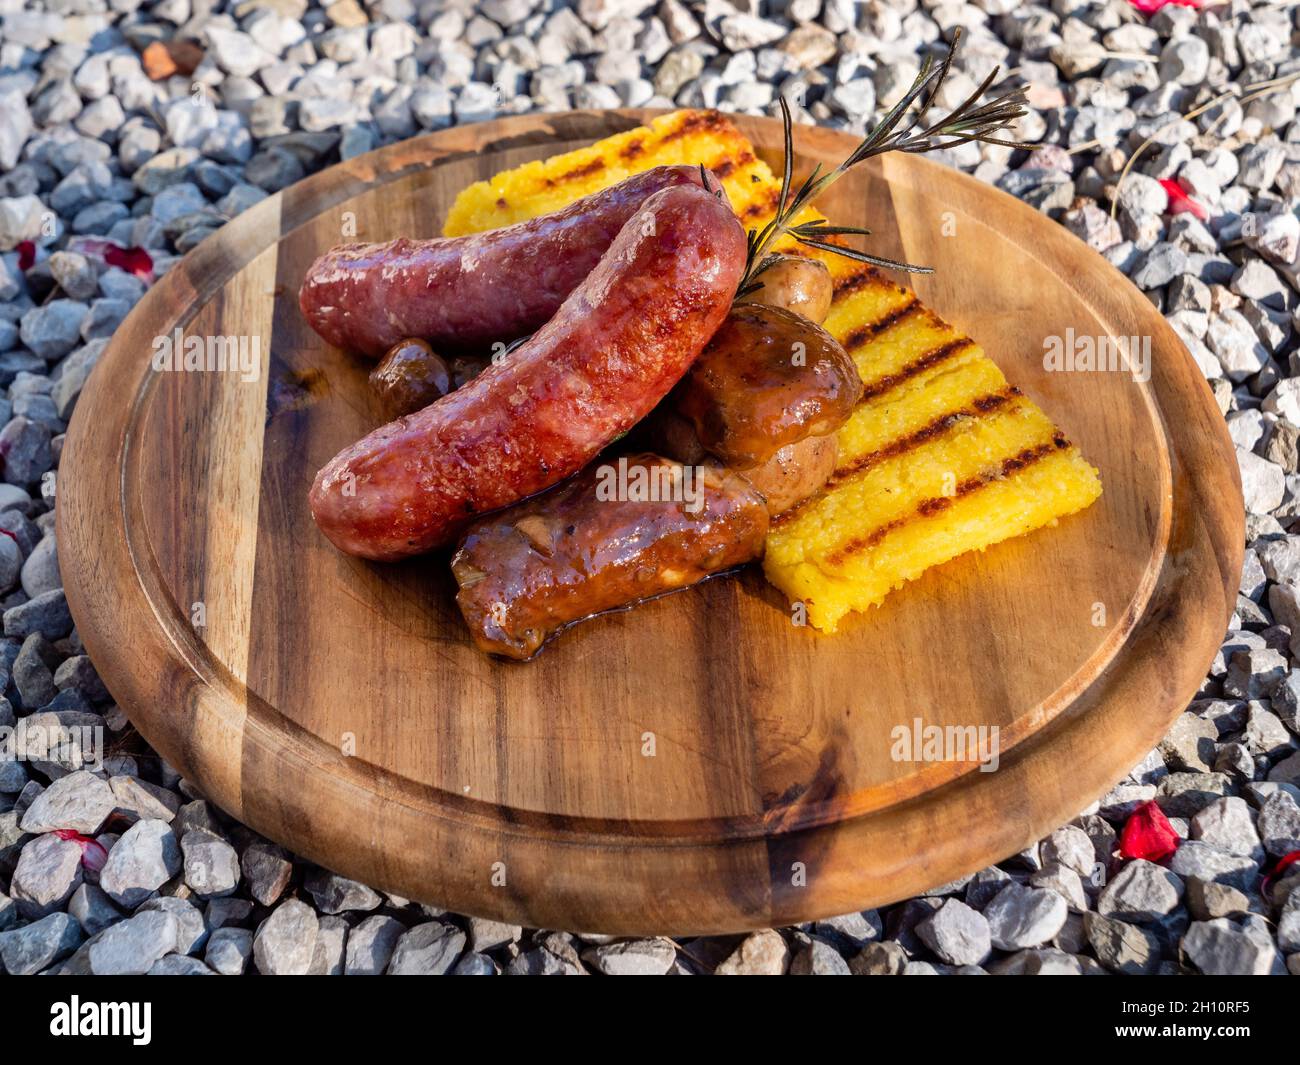 Salsiccia Italian Sausage with Sauteed Funghi Porcini or Cep Mushrooms and Grilled Polenta Side View Stock Photo